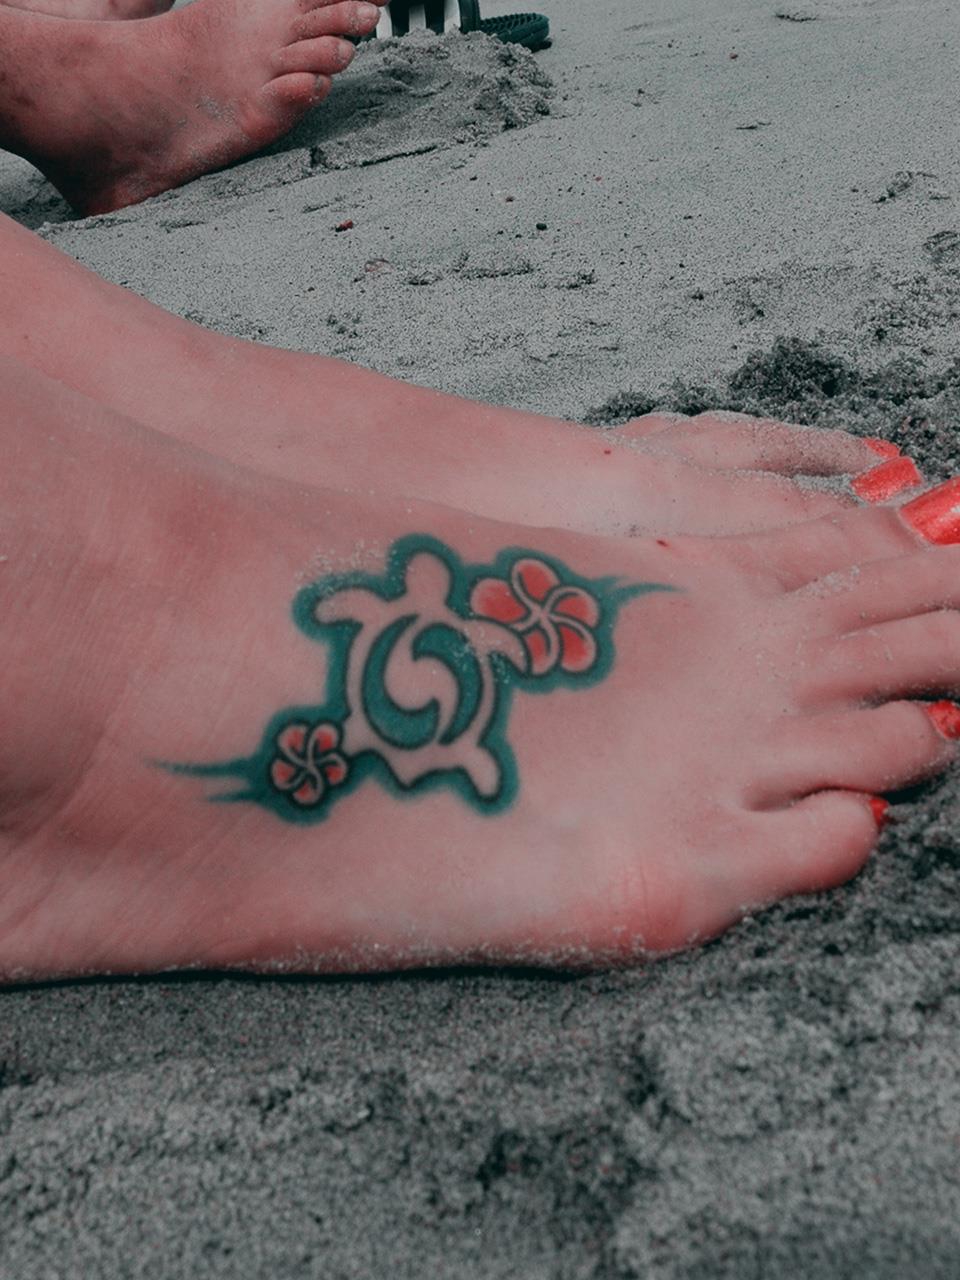 25 Amazing Foot Tattoo Designs With Meanings - Saved Tattoo